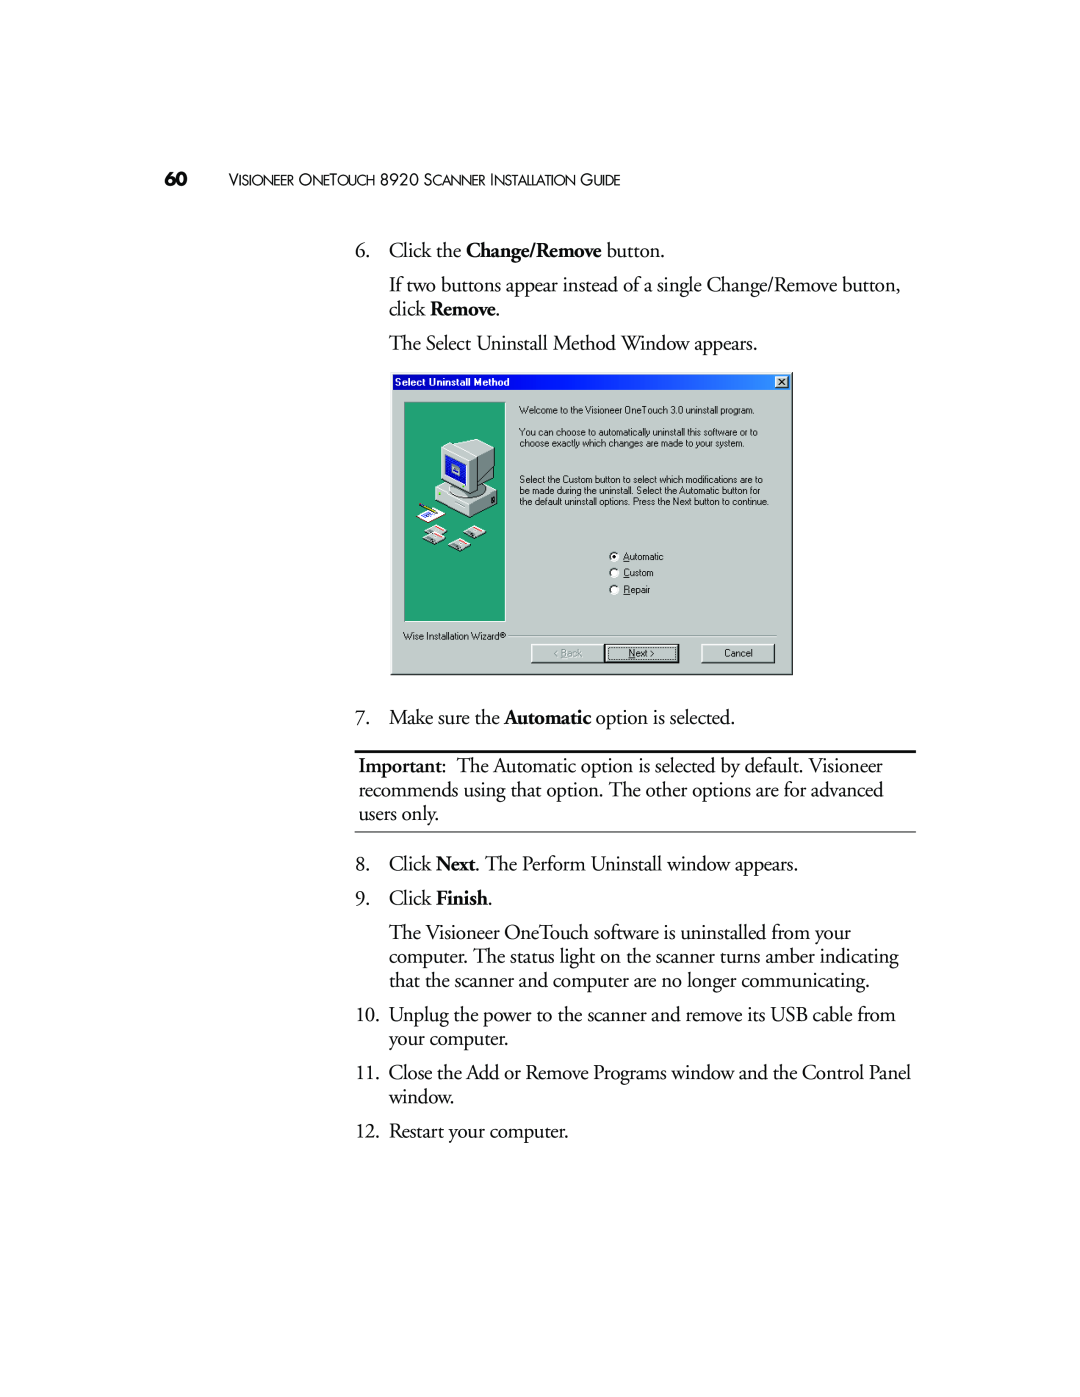 Visioneer manual VISIONEER ONETOUCH 8920 SCANNER INSTALLATION GUIDE 